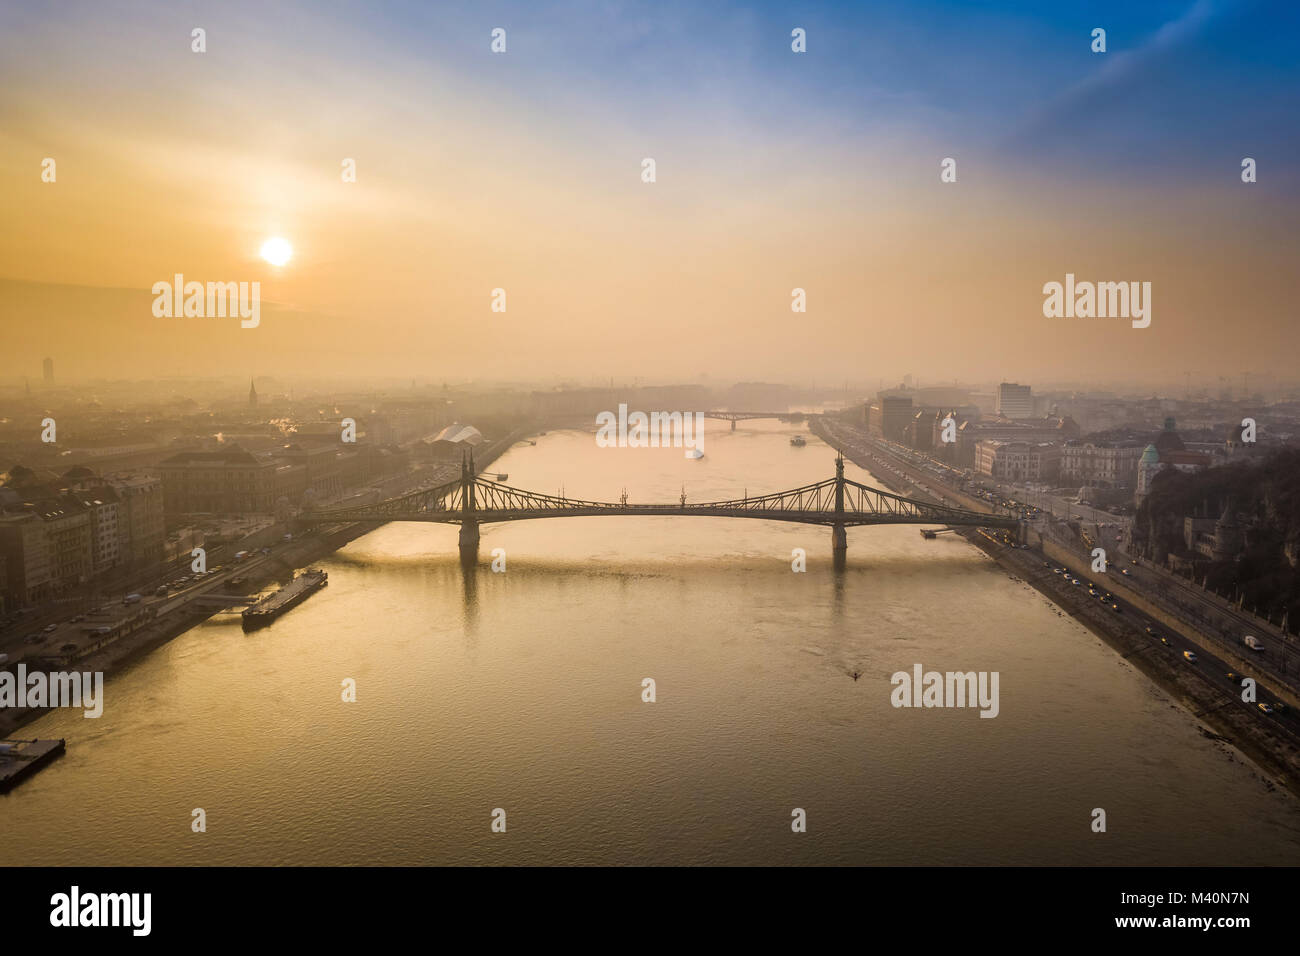 Budapest, Hungary - Aerial panoramic skyline view of Liberty Bridge (Szabadsag Hid) over River Danube at sunrise with beautiful sky and clouds Stock Photo